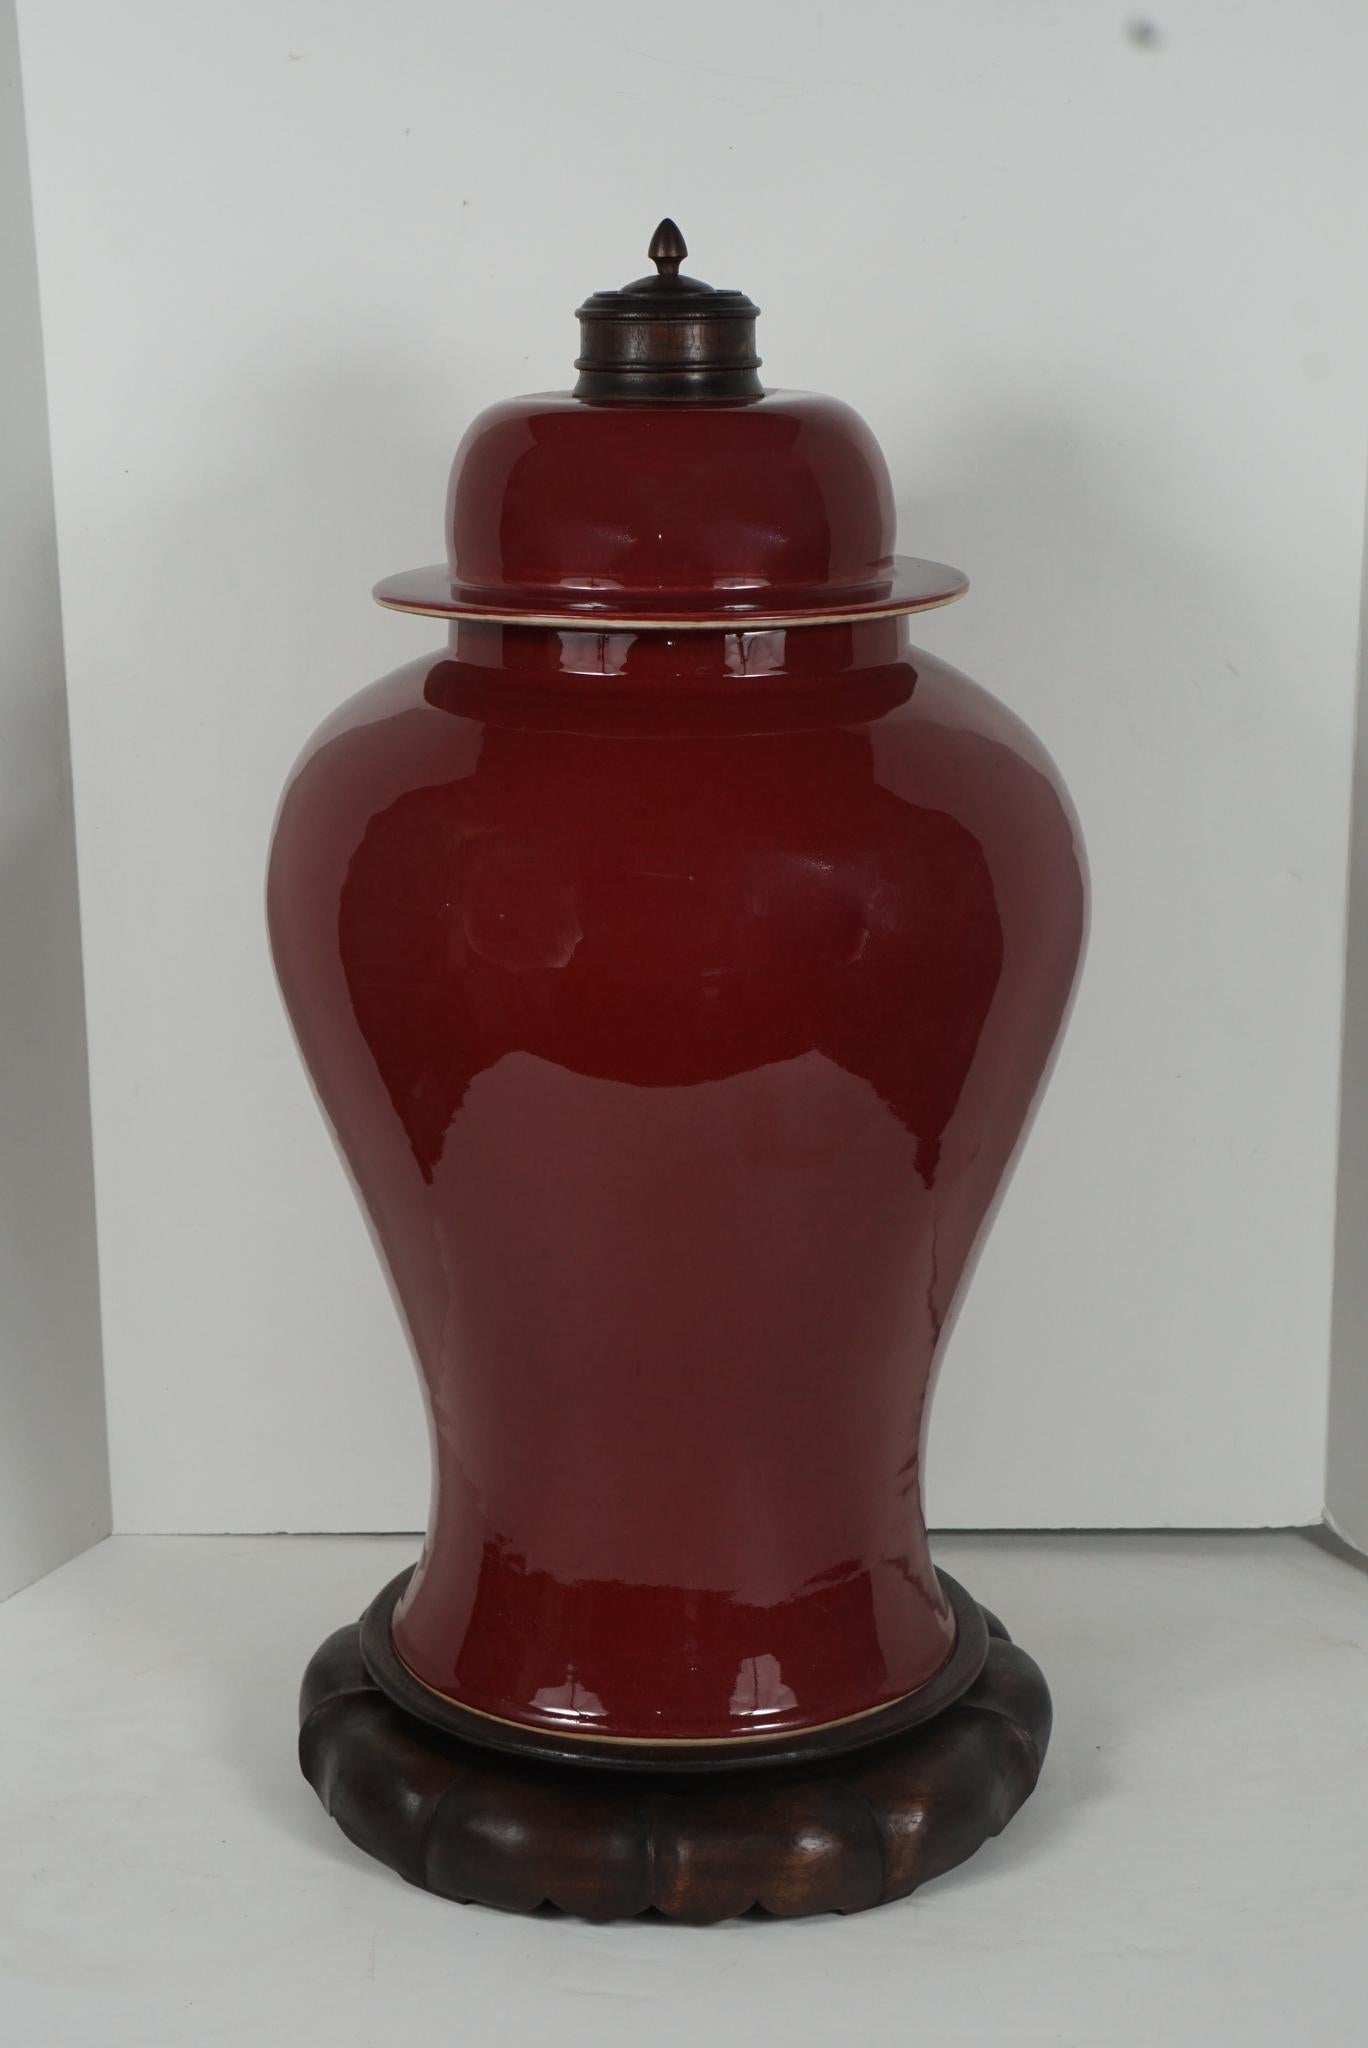 This large vase made in China during the first three decades of the 20th century is of a lovely deep Sang De Boeuf color. Ox Blood in the English language, this opaque deep red color was first developed to perfection in the reign of Kang Hsi during